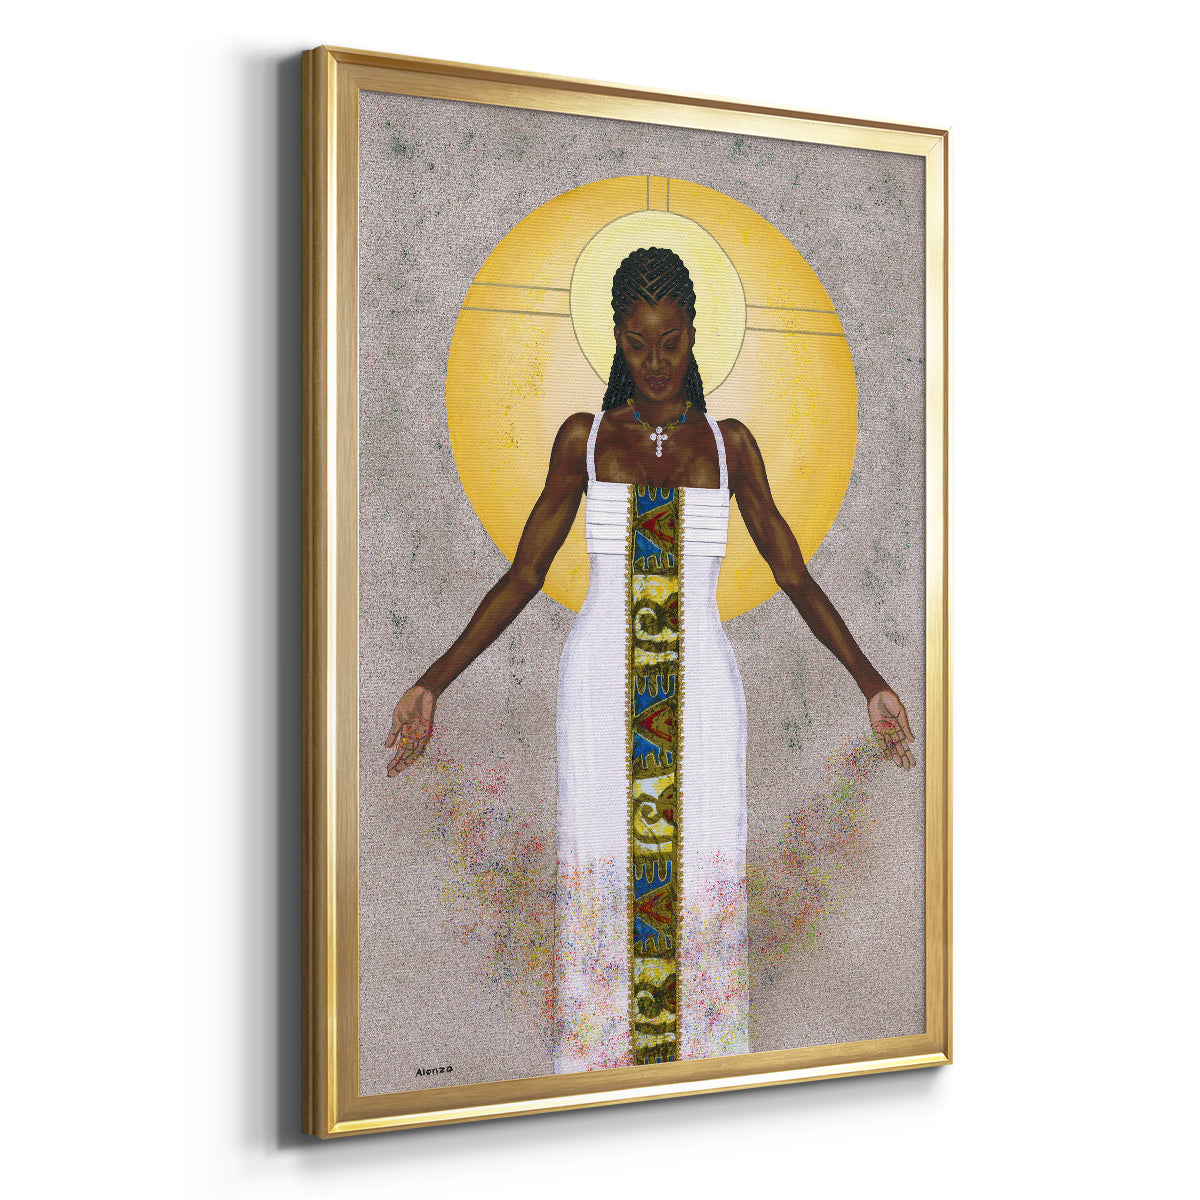 Her Peace Premium Framed Print - Ready to Hang